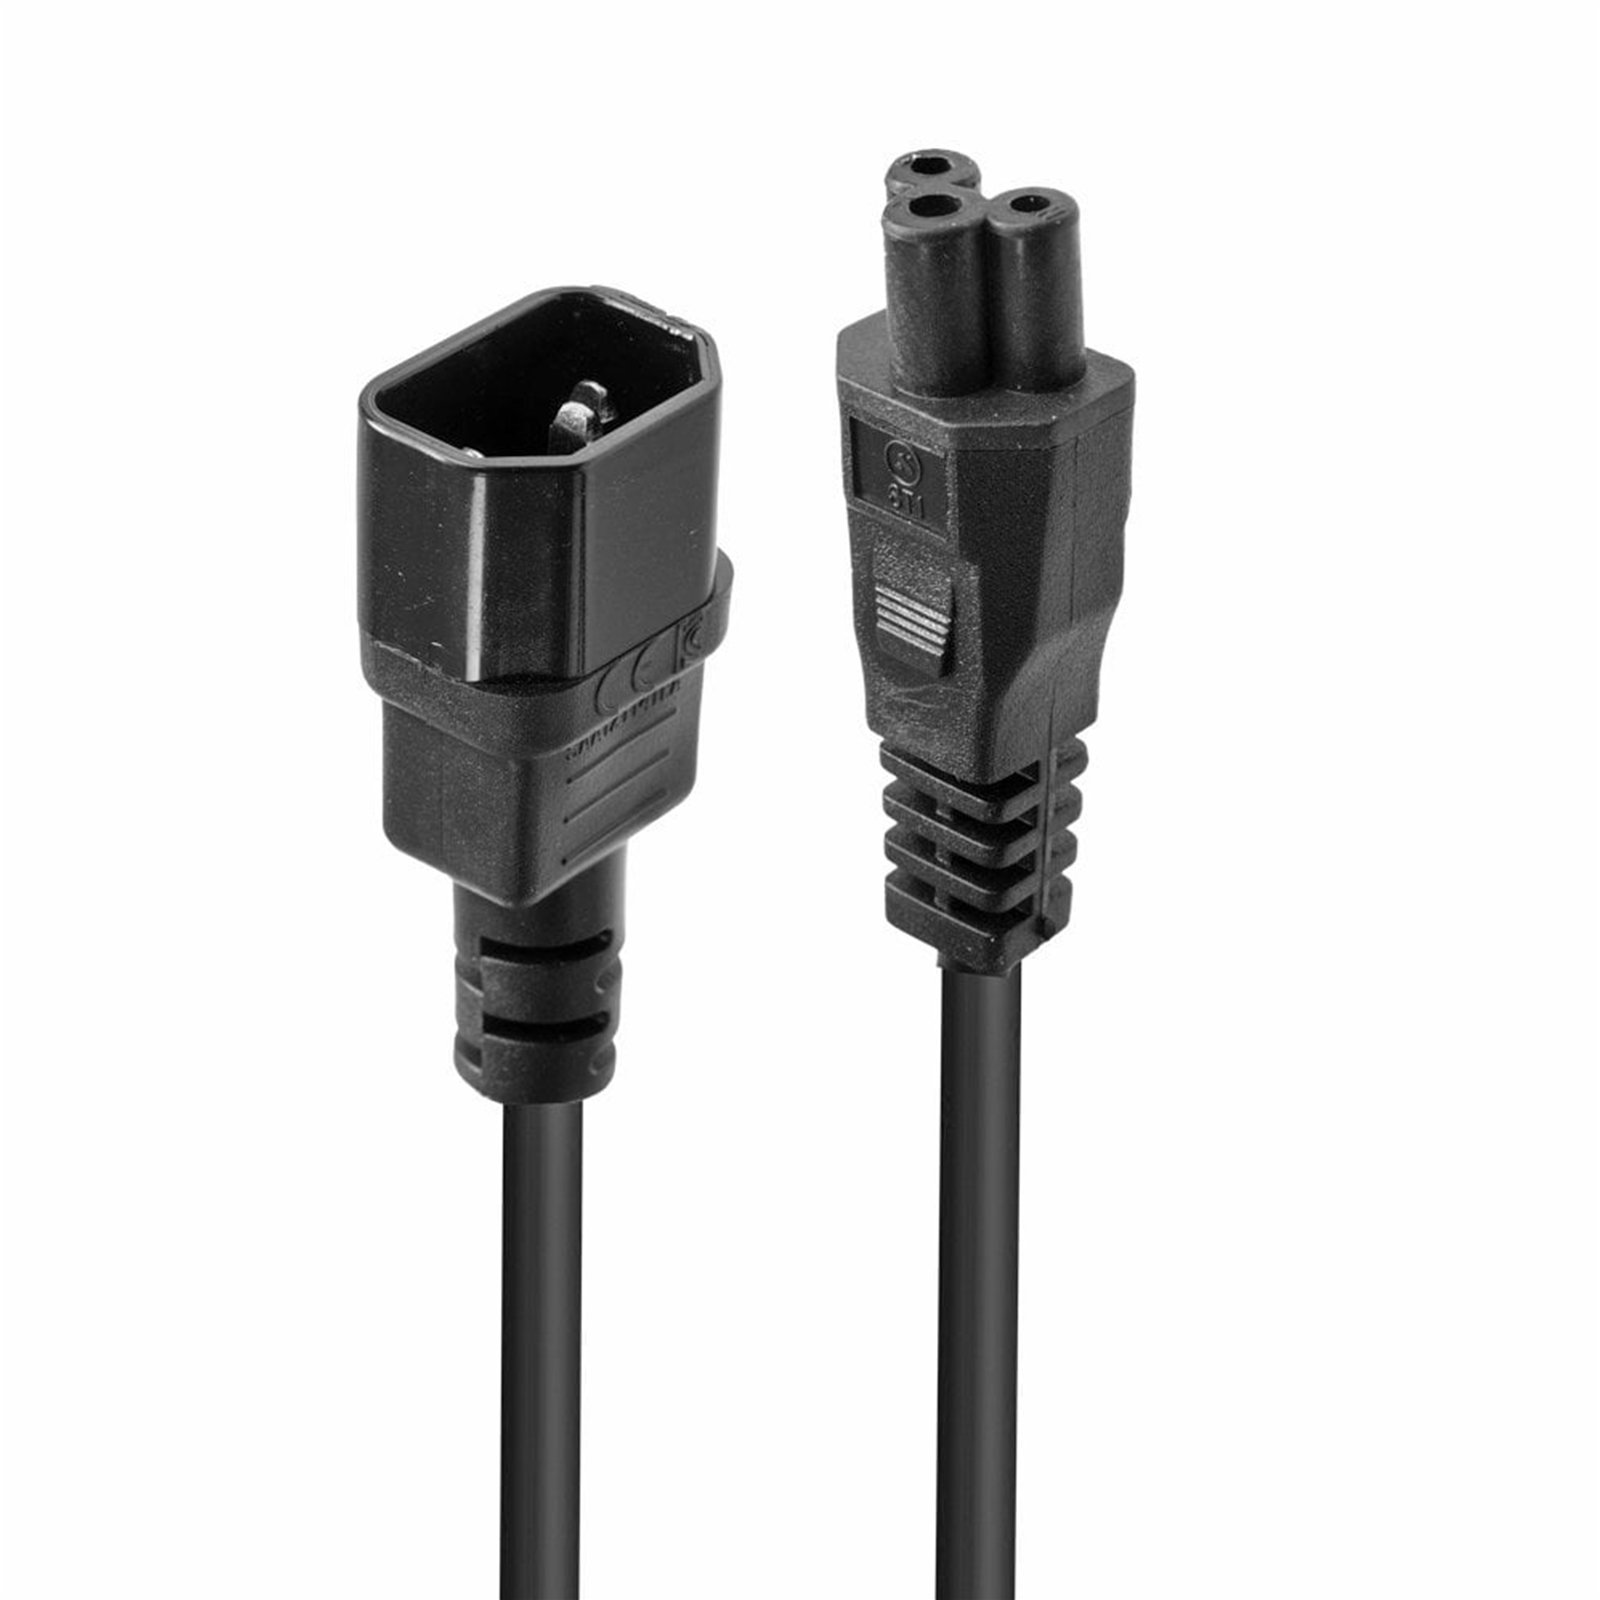 LINDY 30341, 2m C5 to C14 Mains Cable, Lead Free, High Temperature Resistance, Provides max. 2.5A/250V to a device, 10 year warranty